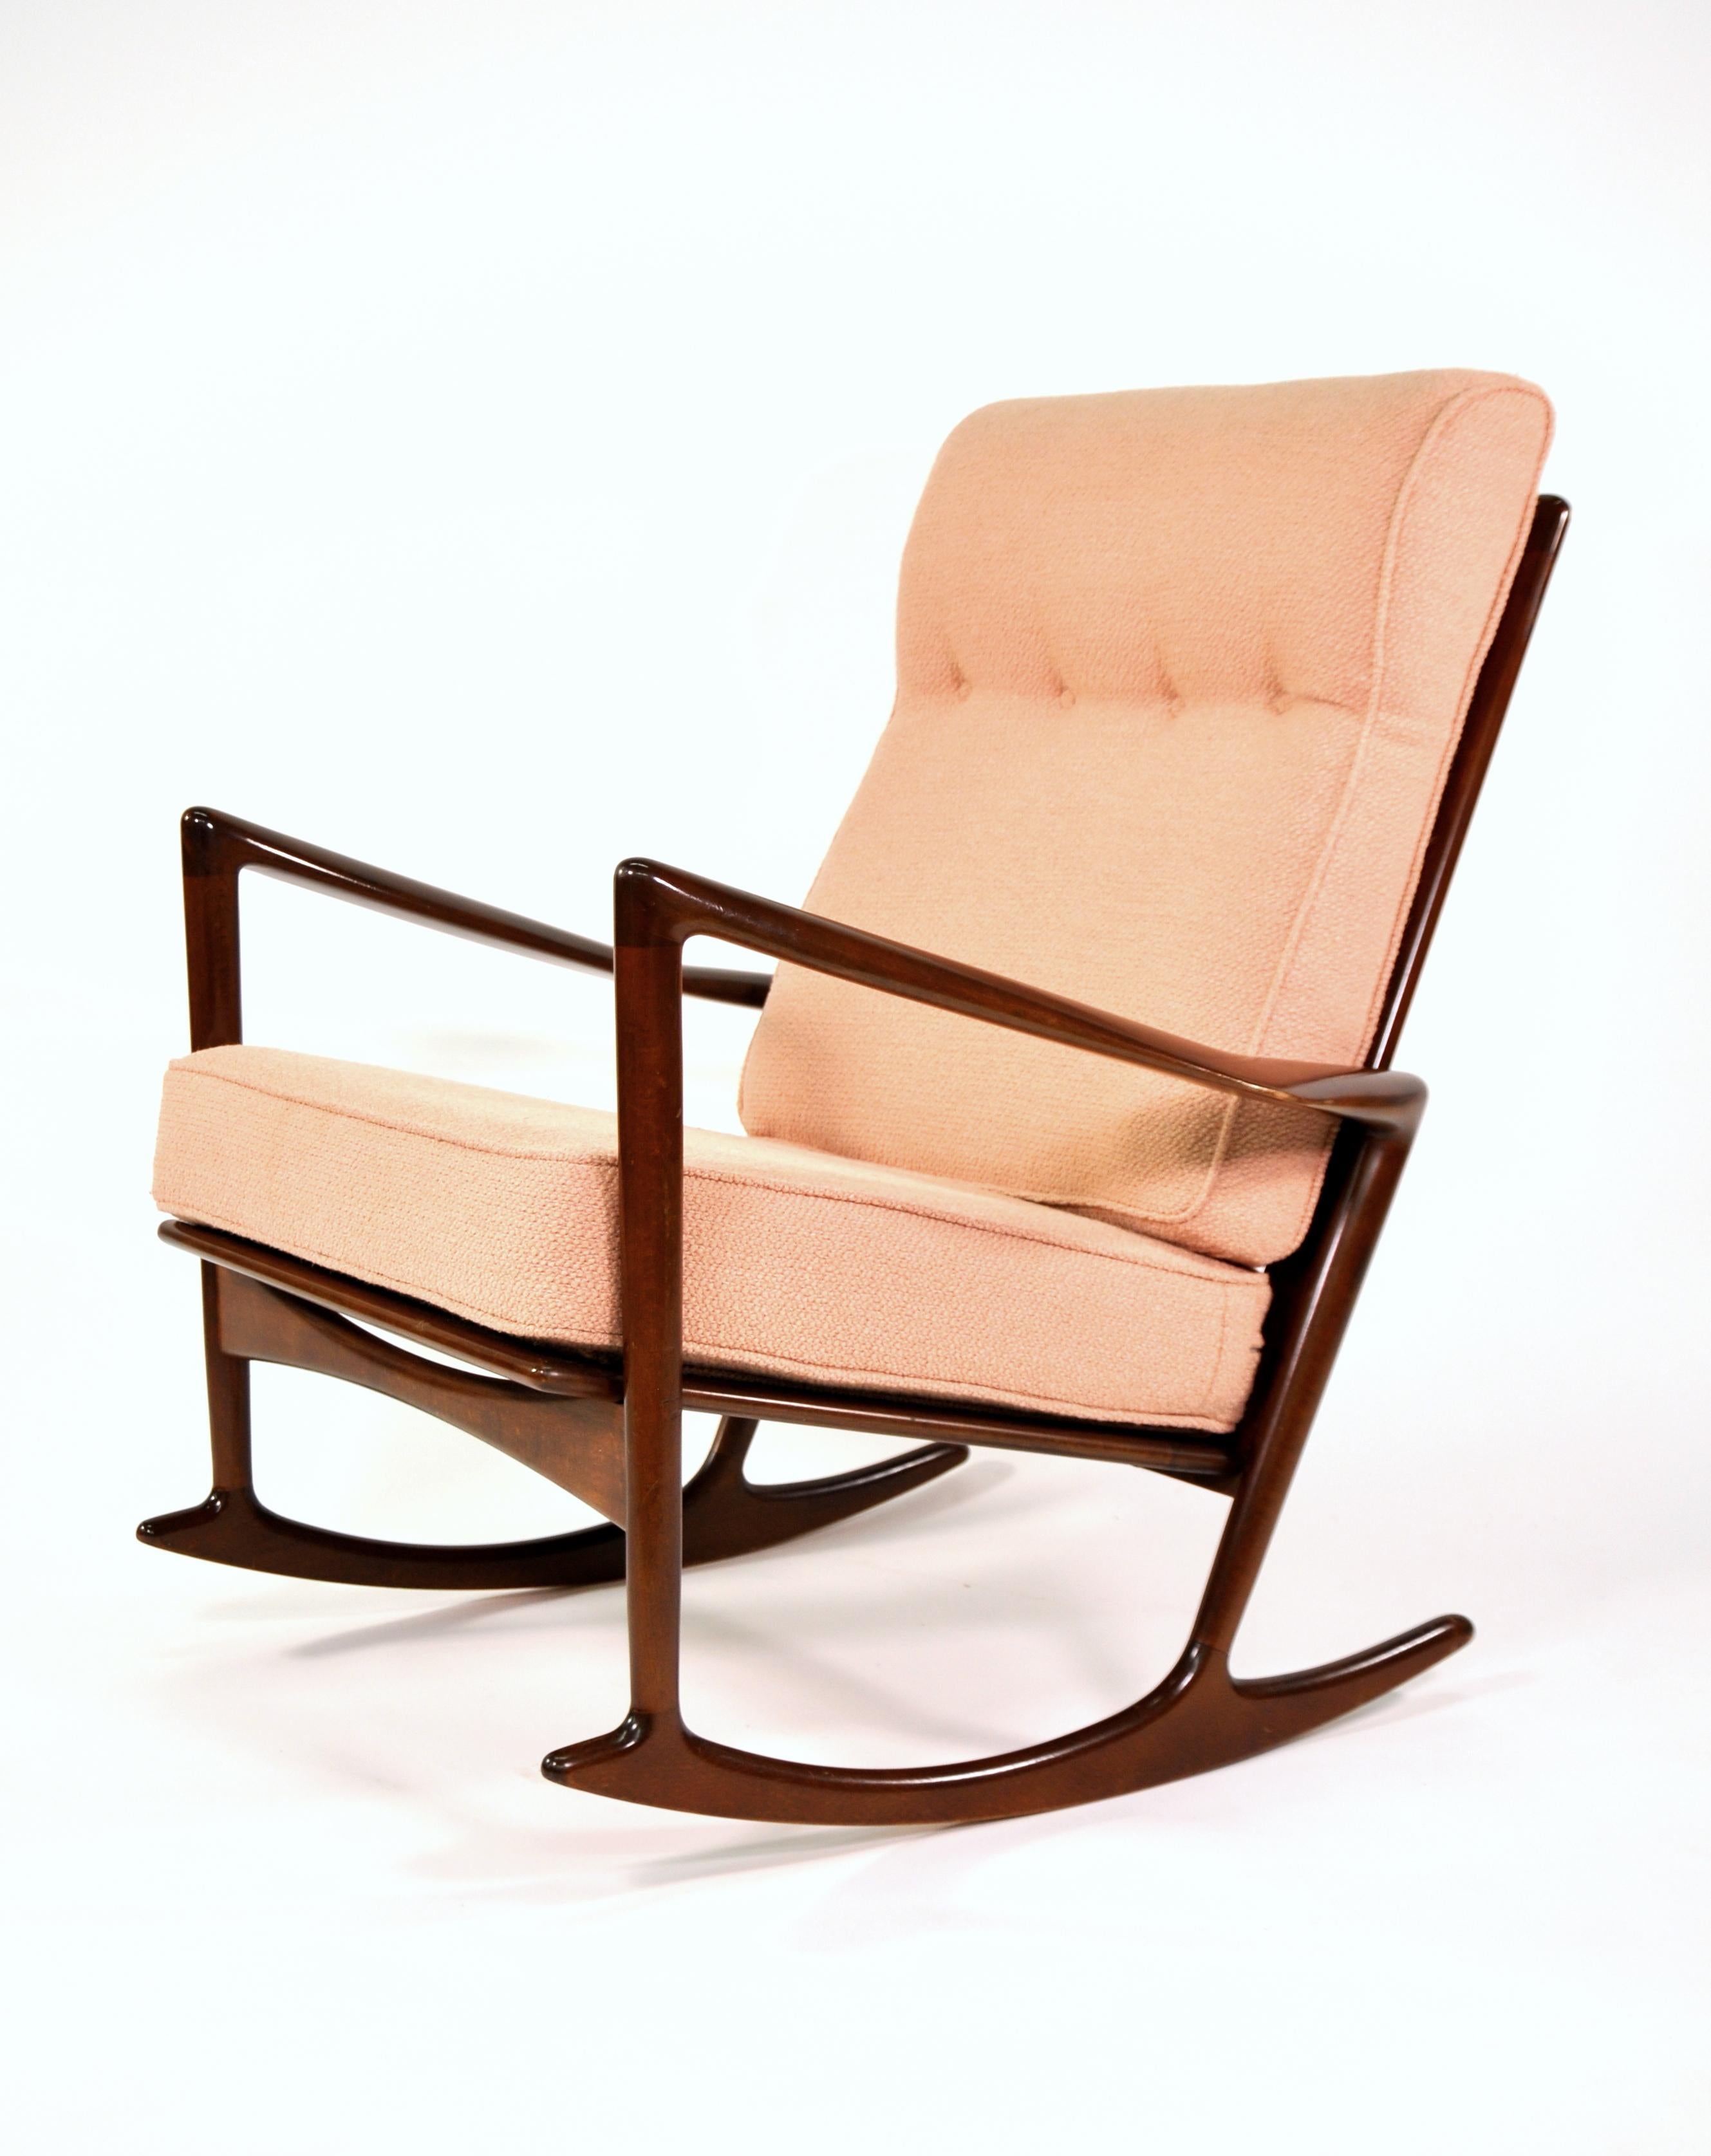 Ib Kofod-Larsen Sculptural Rocking Chair for Selig In Good Condition In Miami, FL